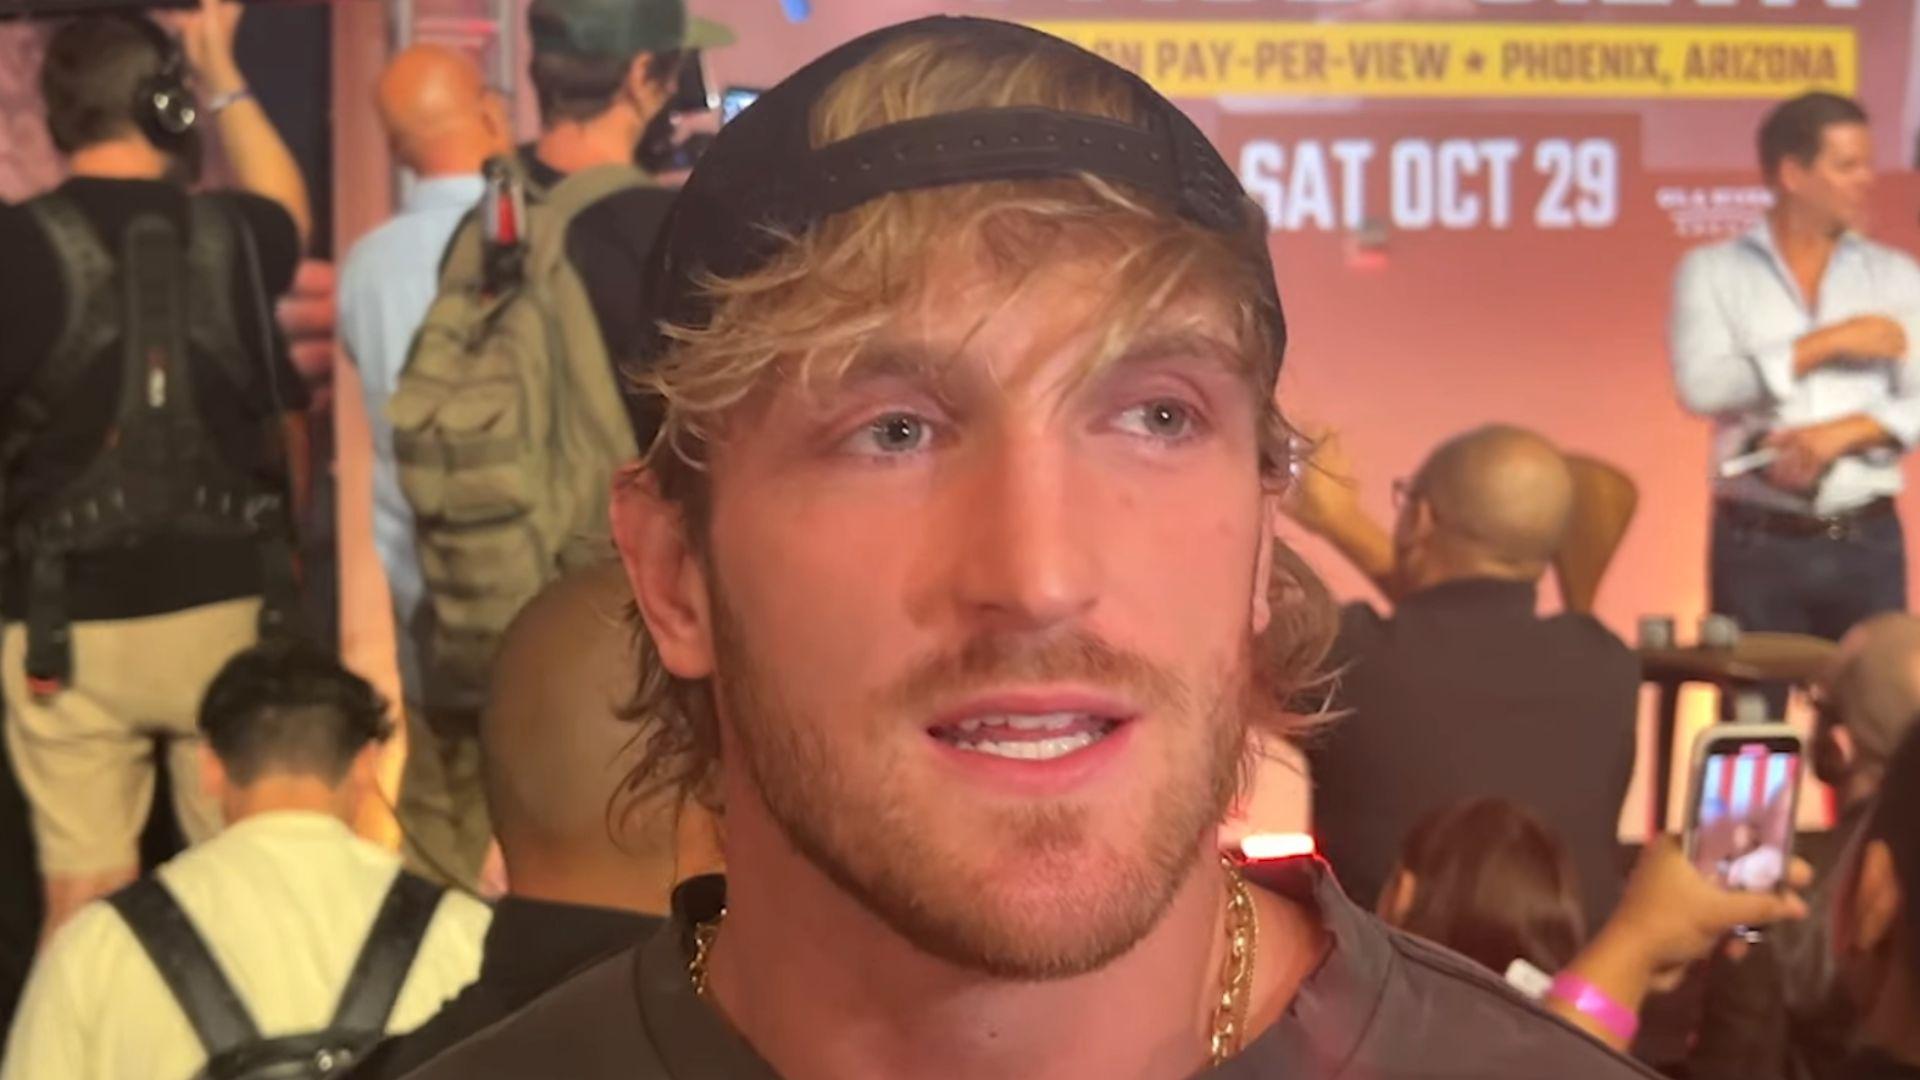 Logan Paul talking to camera with backwards hat against red background